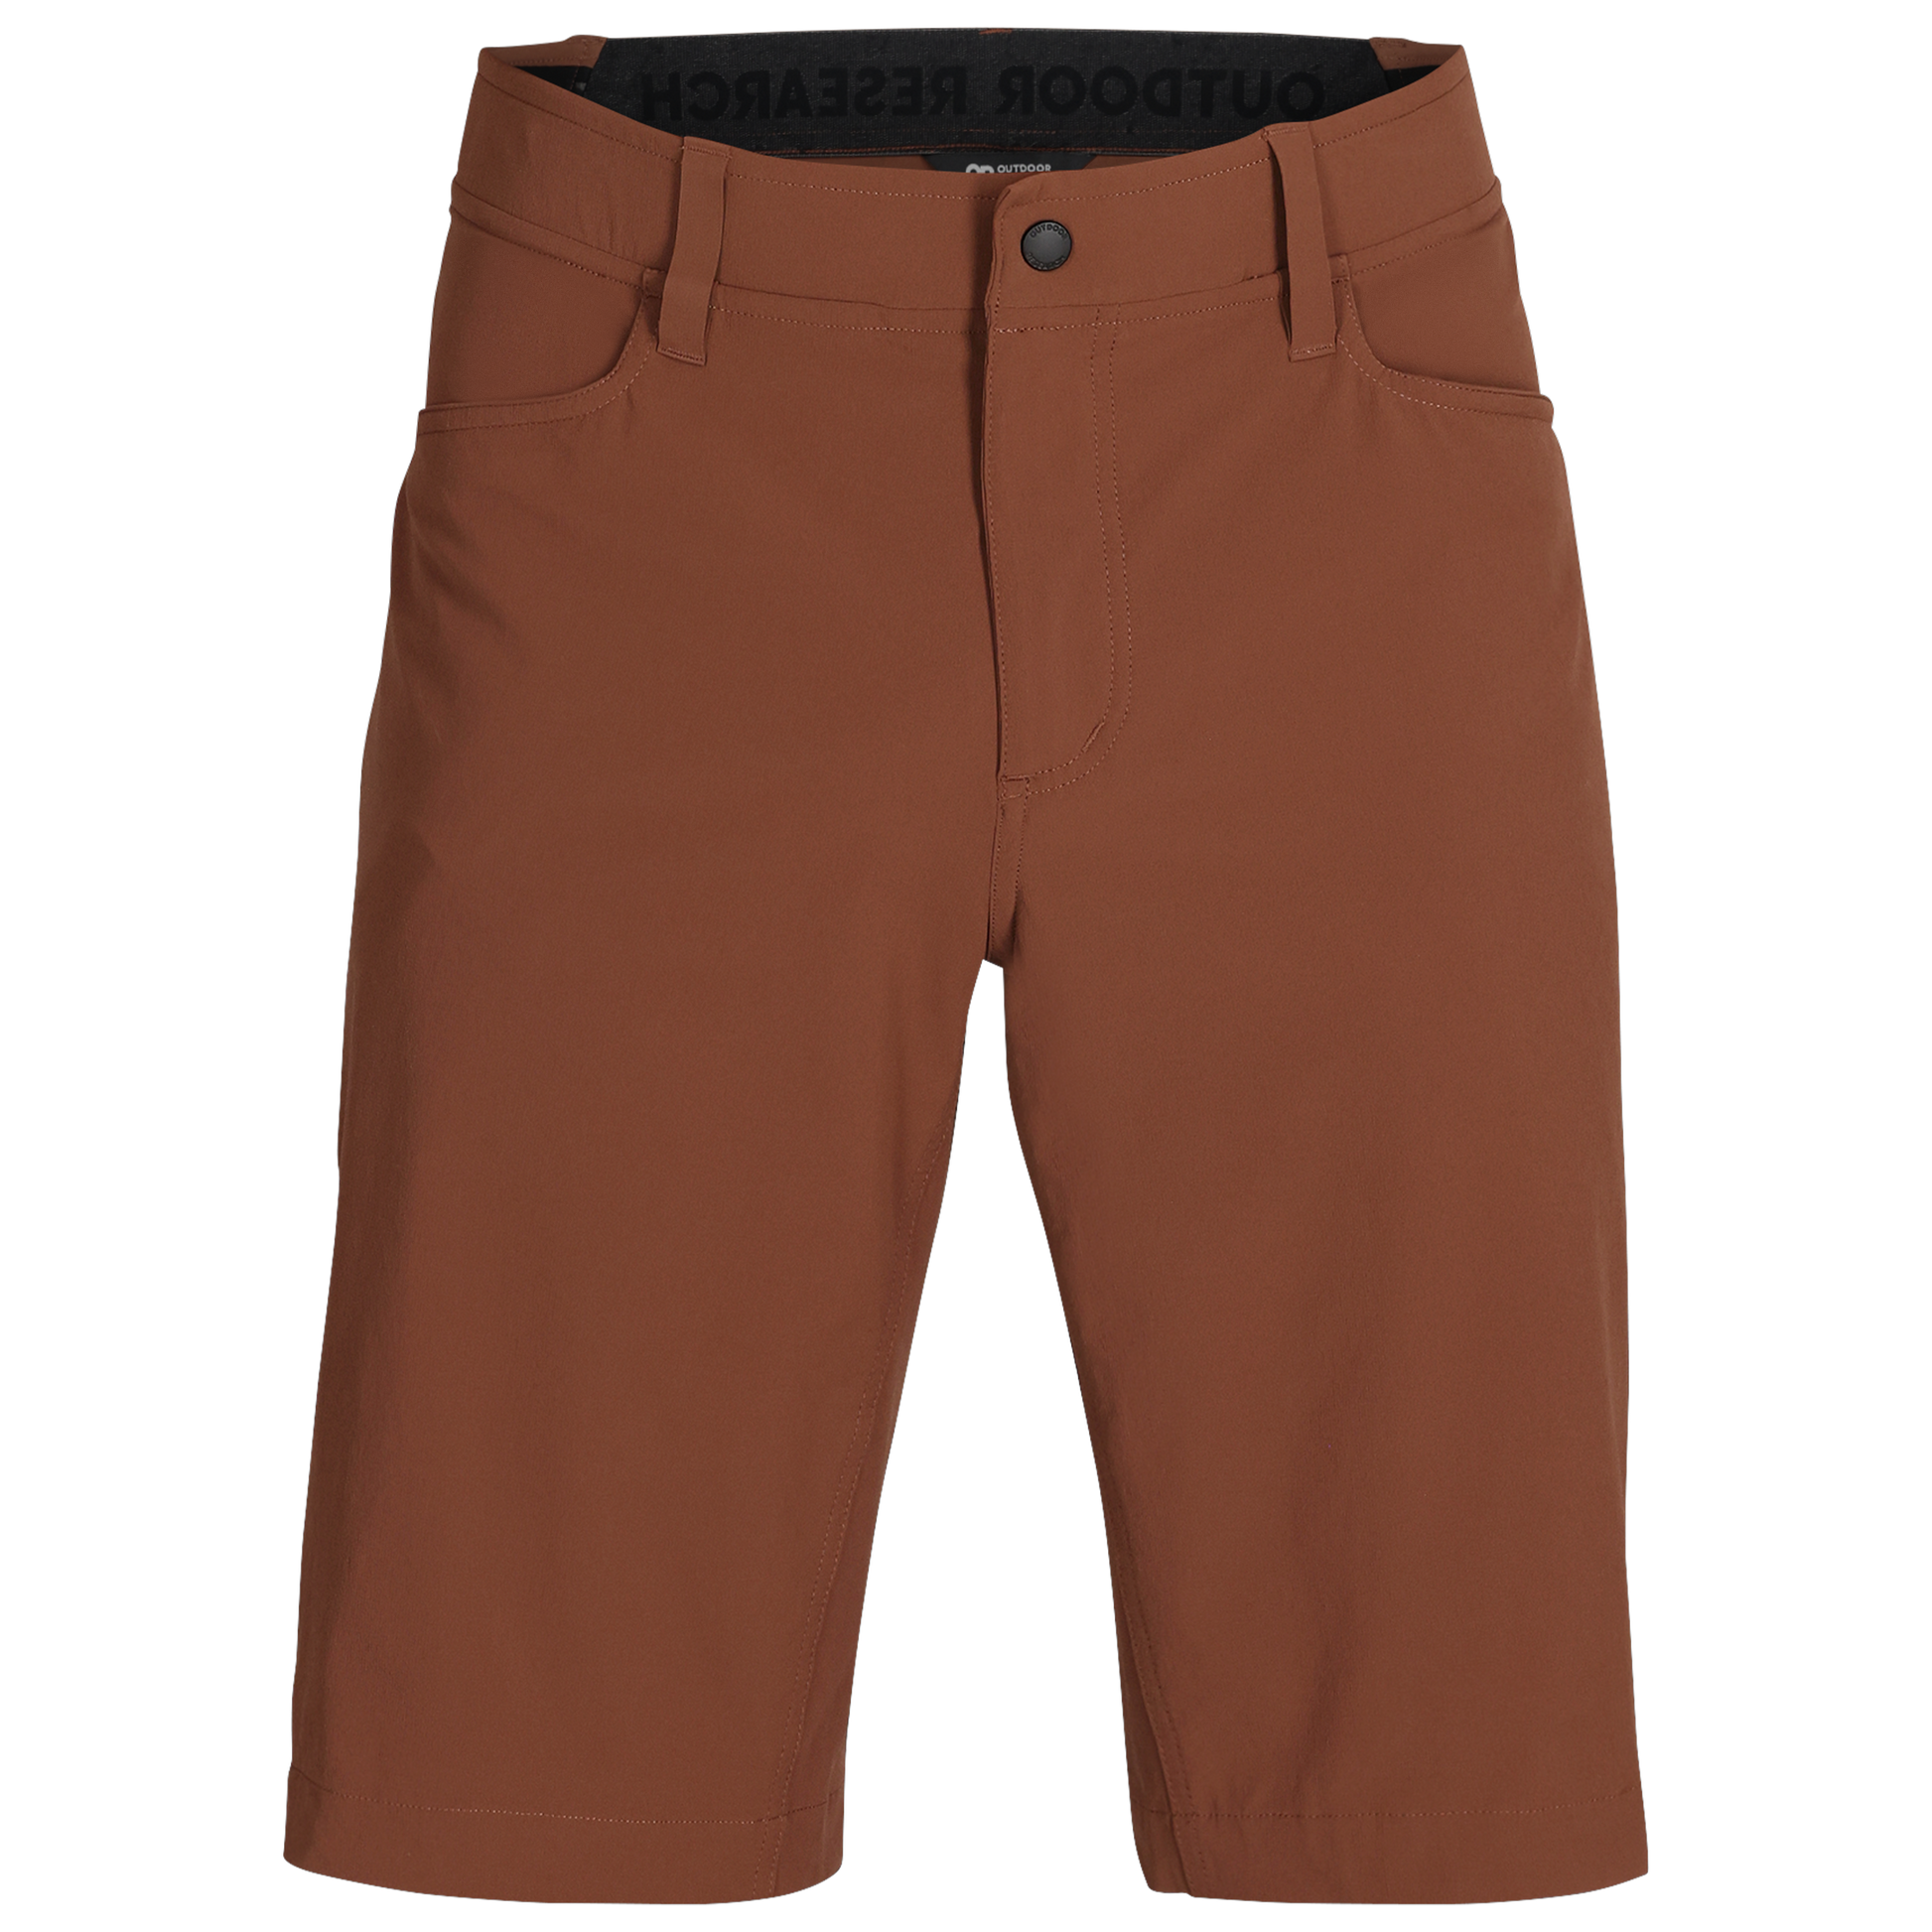 Men's Stretch Golf Shorts 5 Pockets 8 Quick Dry Shorts - Brown / S